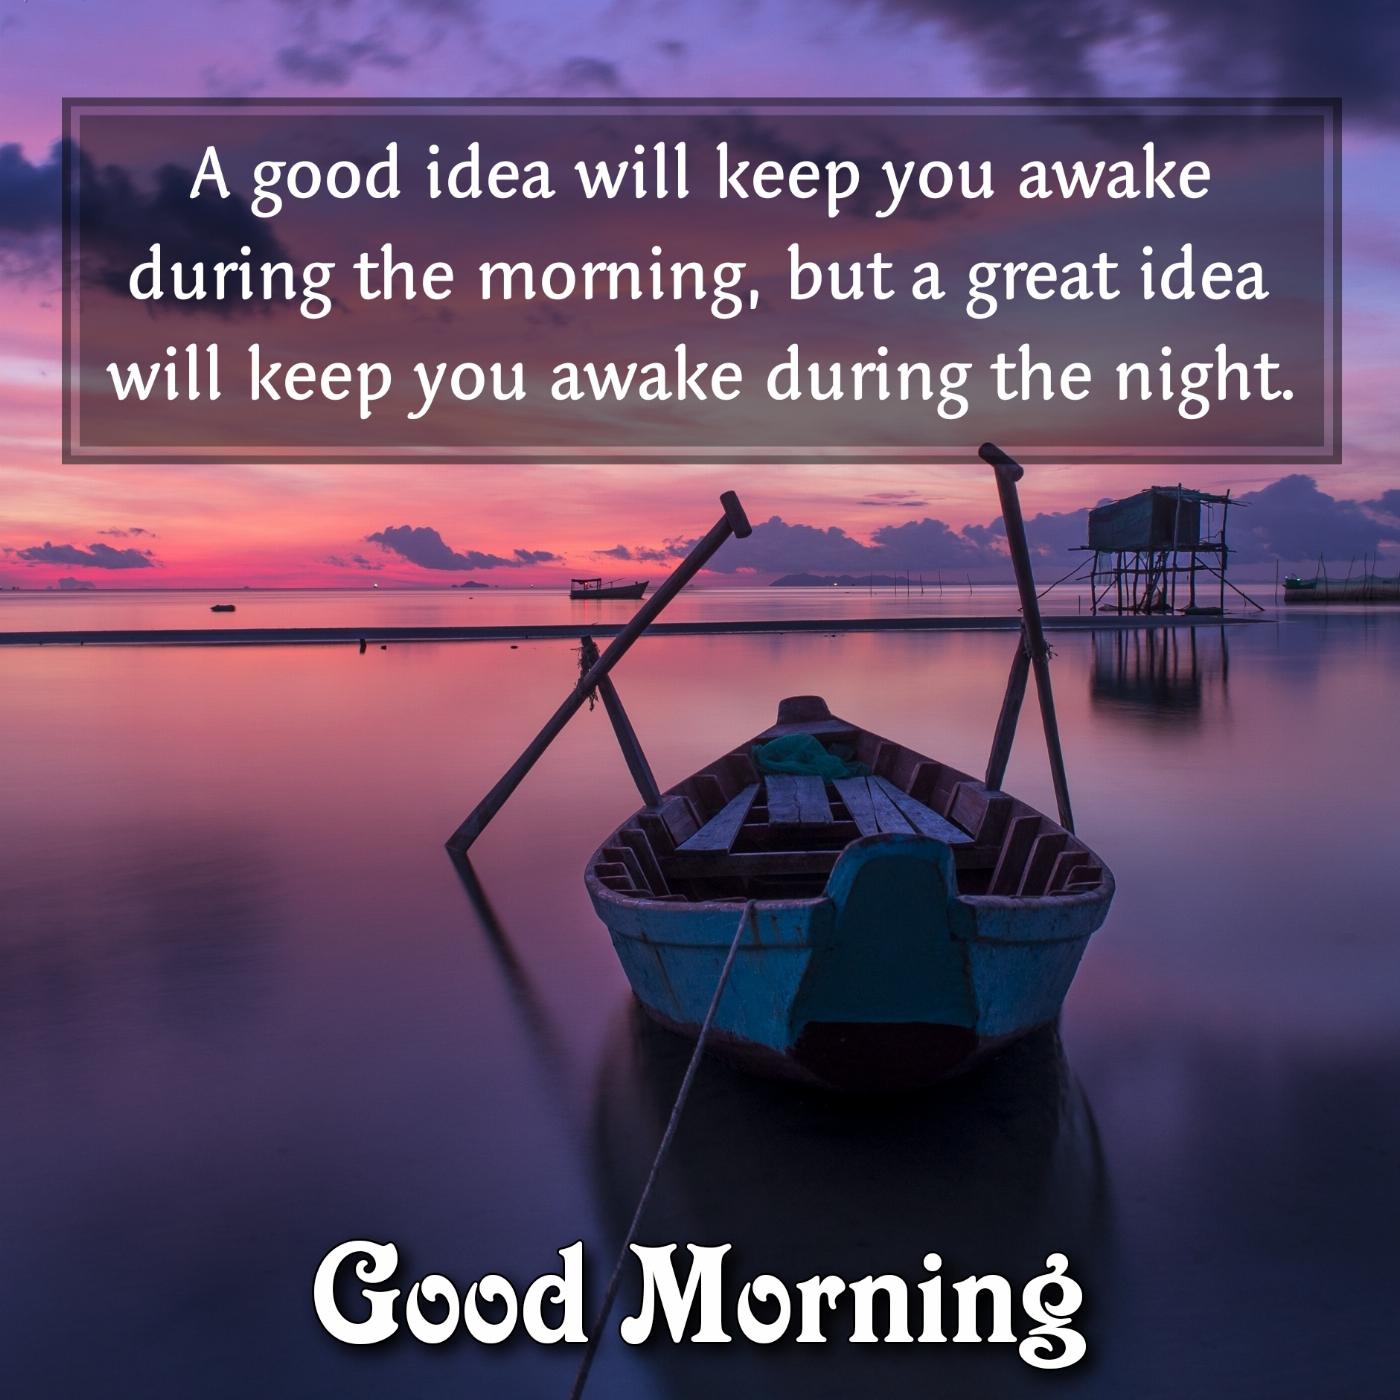 A good idea will keep you awake during the morning